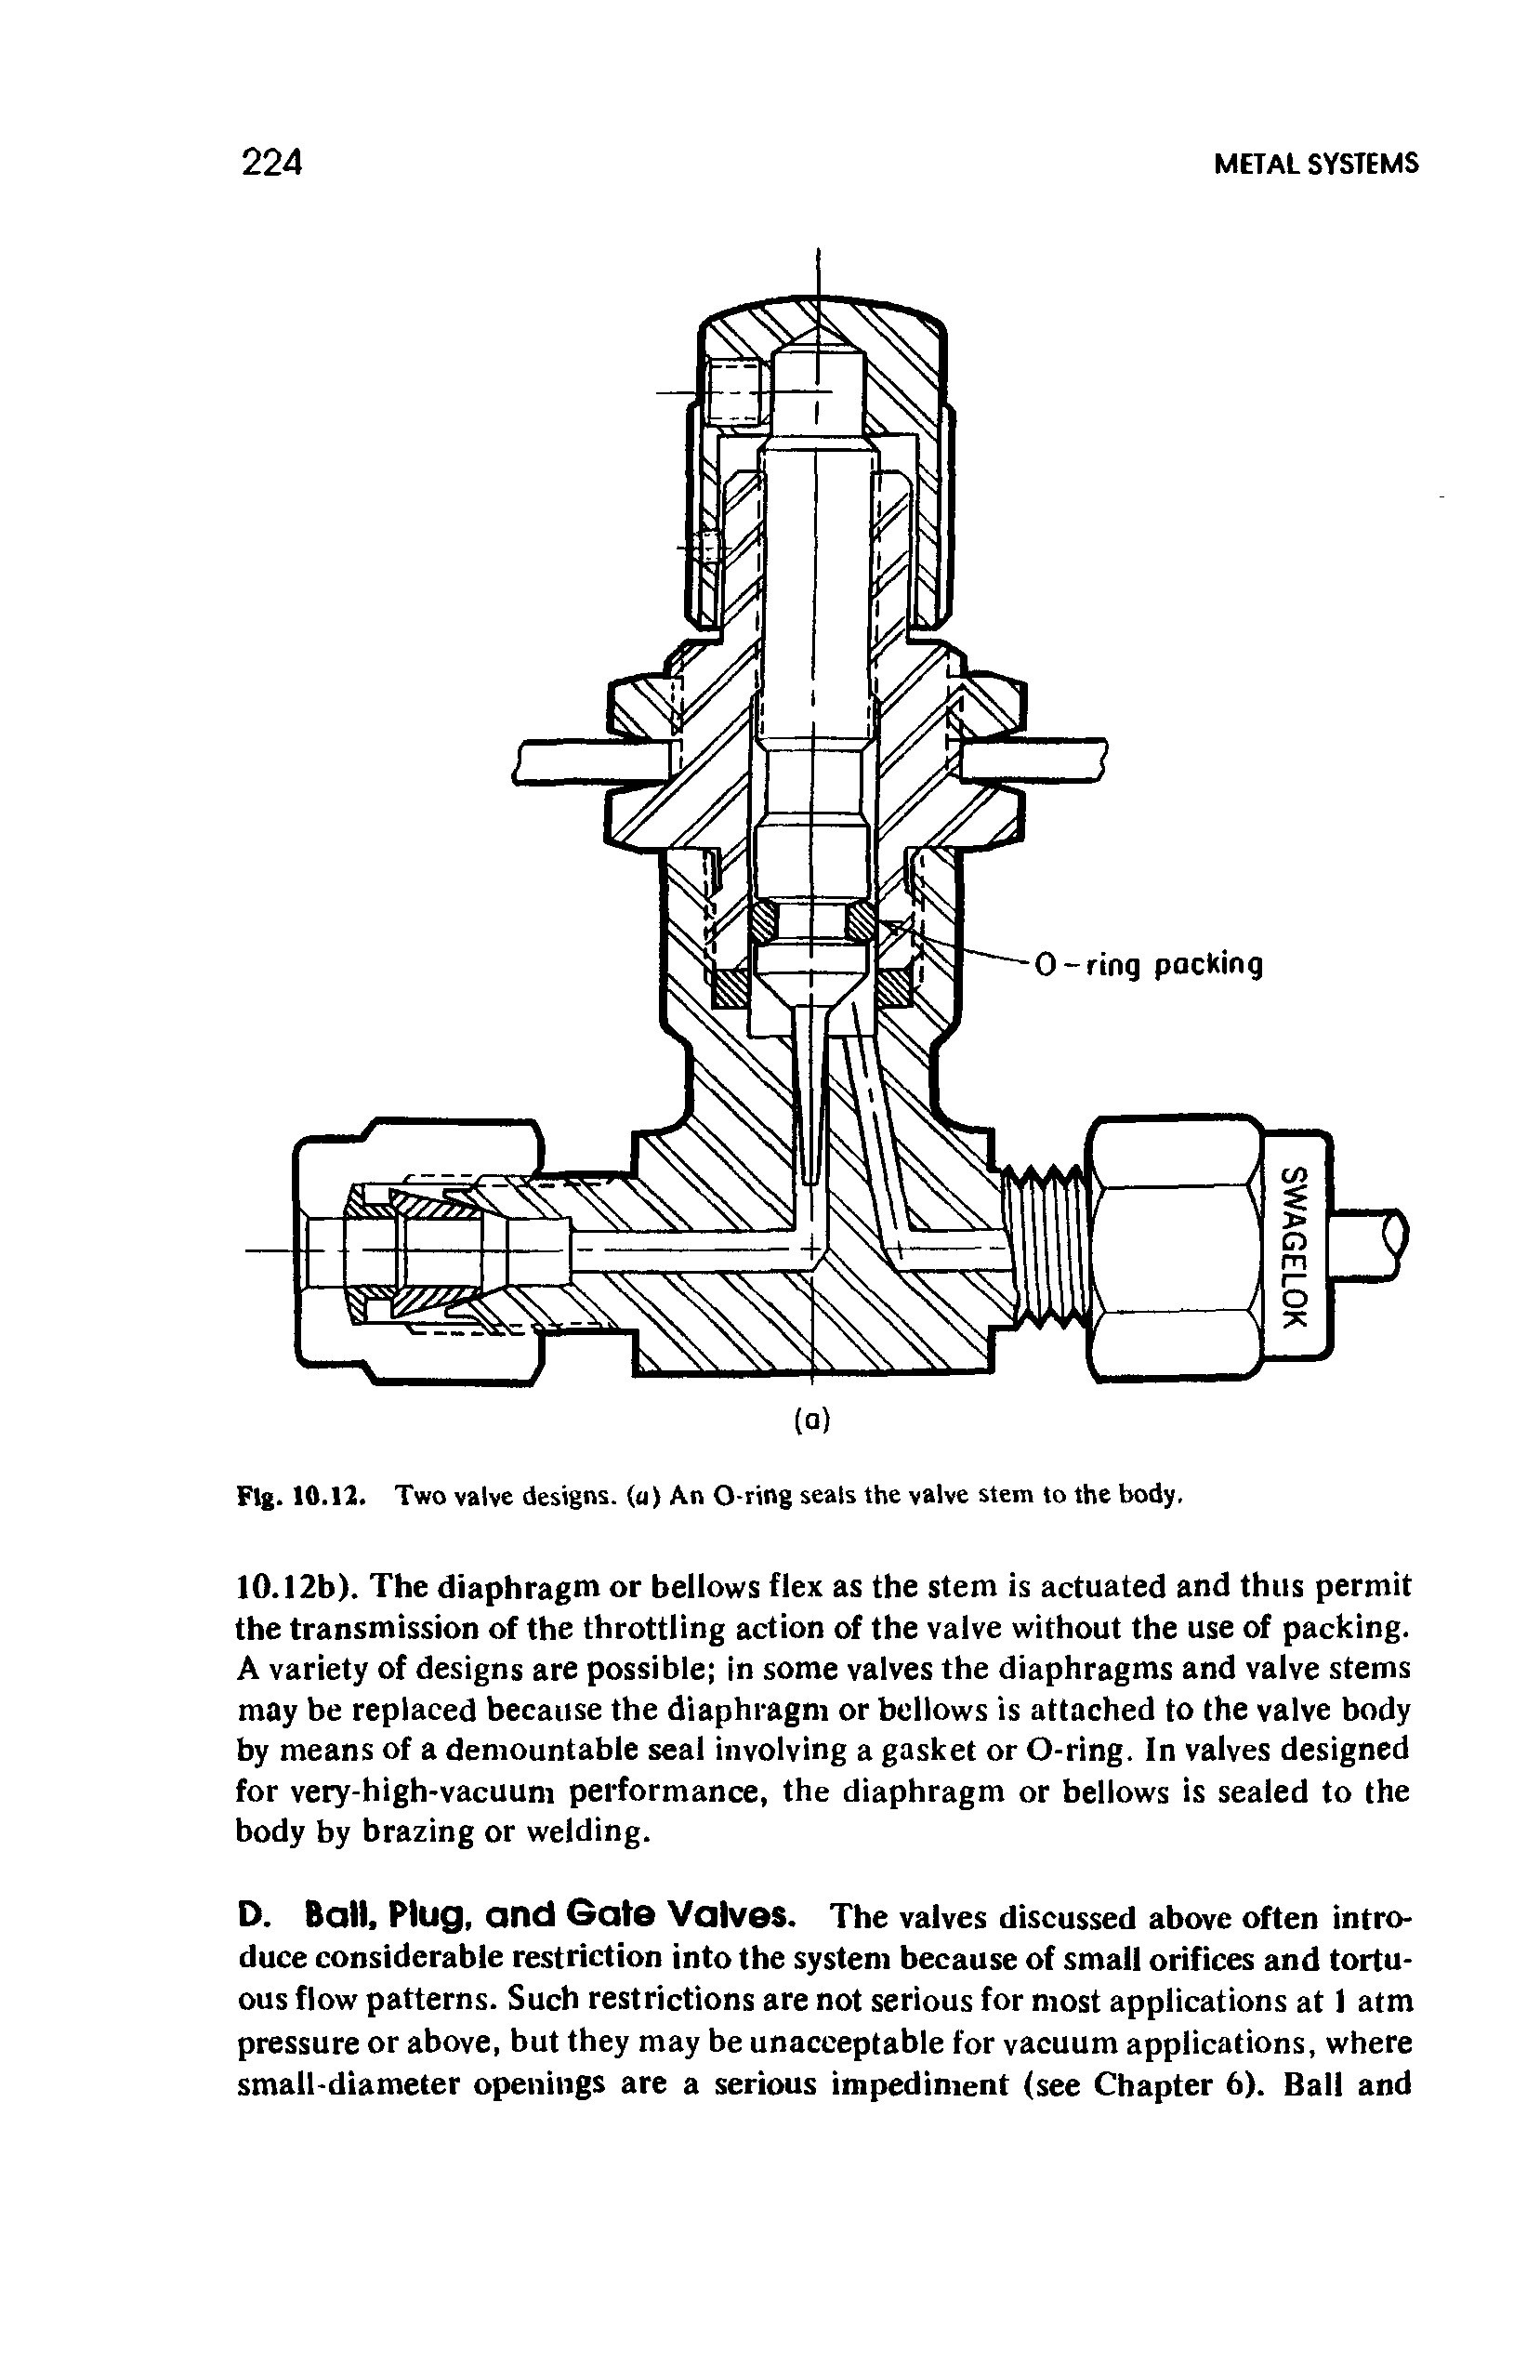 Fig. 10.12. Two valve designs, (u) An O-ring seals the valve stem to the body.